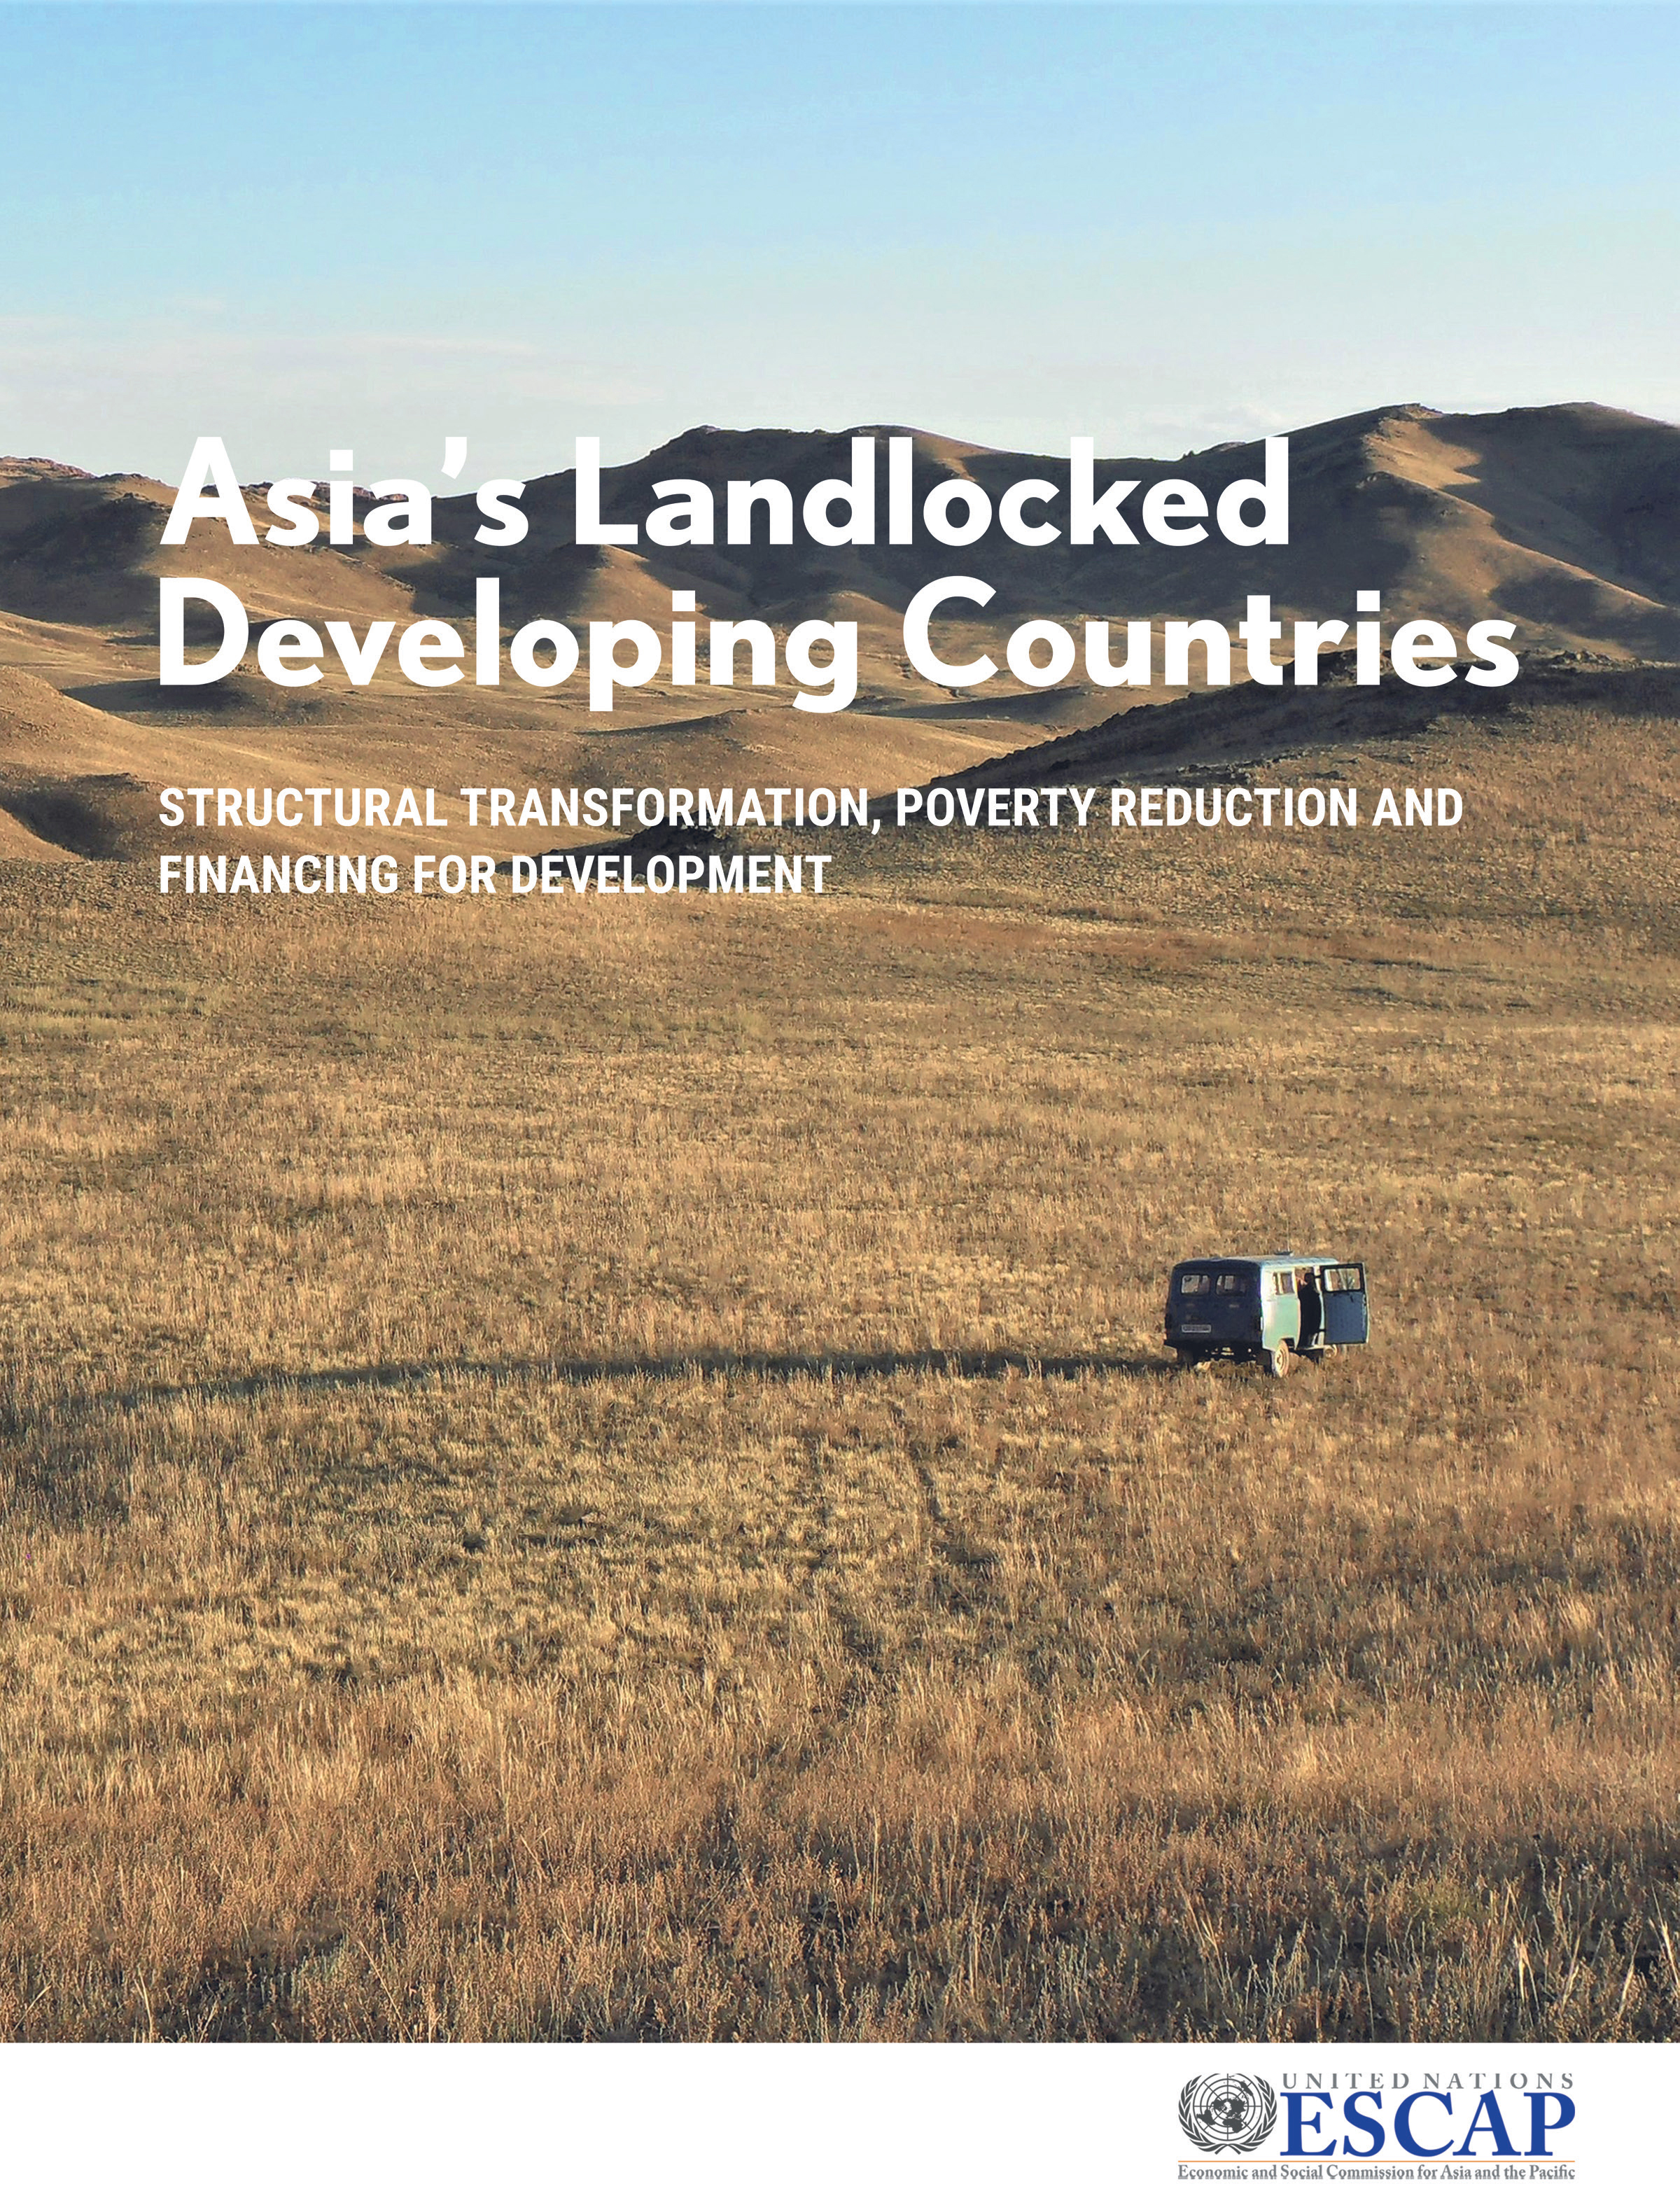 image of Structural transformation and poverty reduction in Asia’s Landlocked Developing Countries